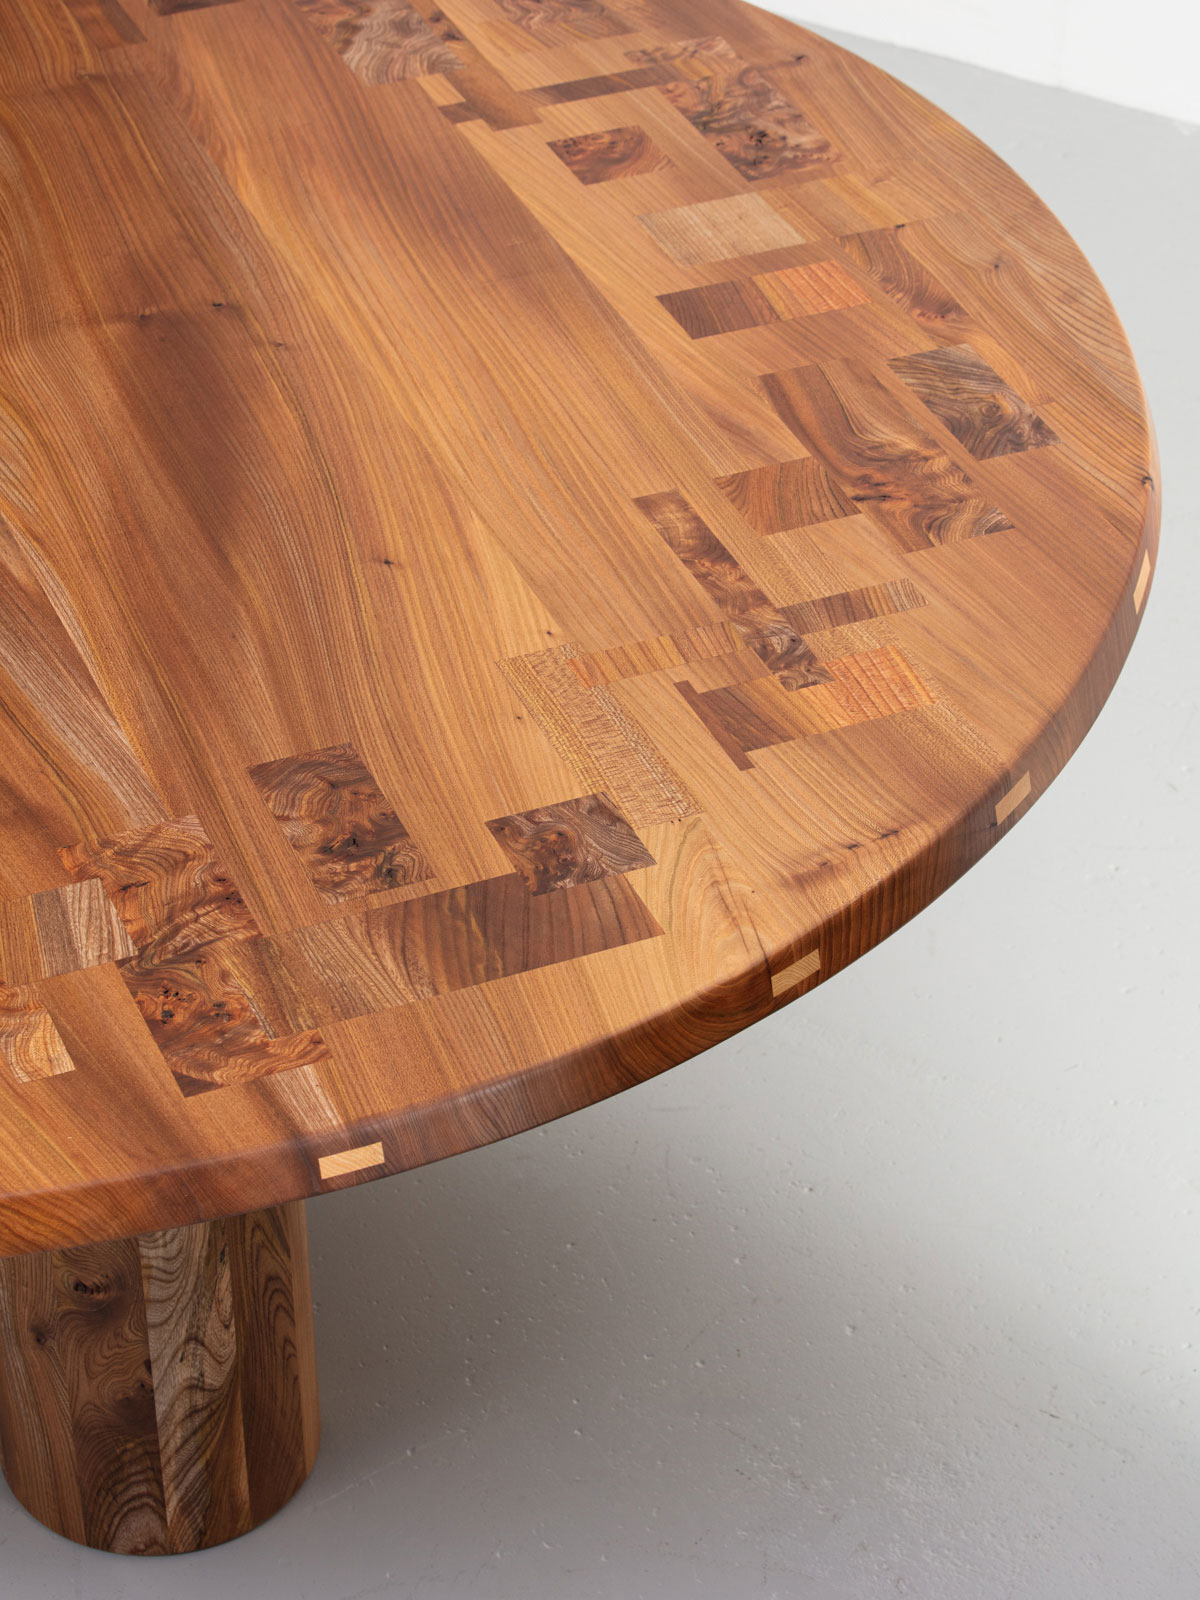 Large Pier round table made with a pattern inlayed table top of Scottish Elm and staved Scottish Elm legs